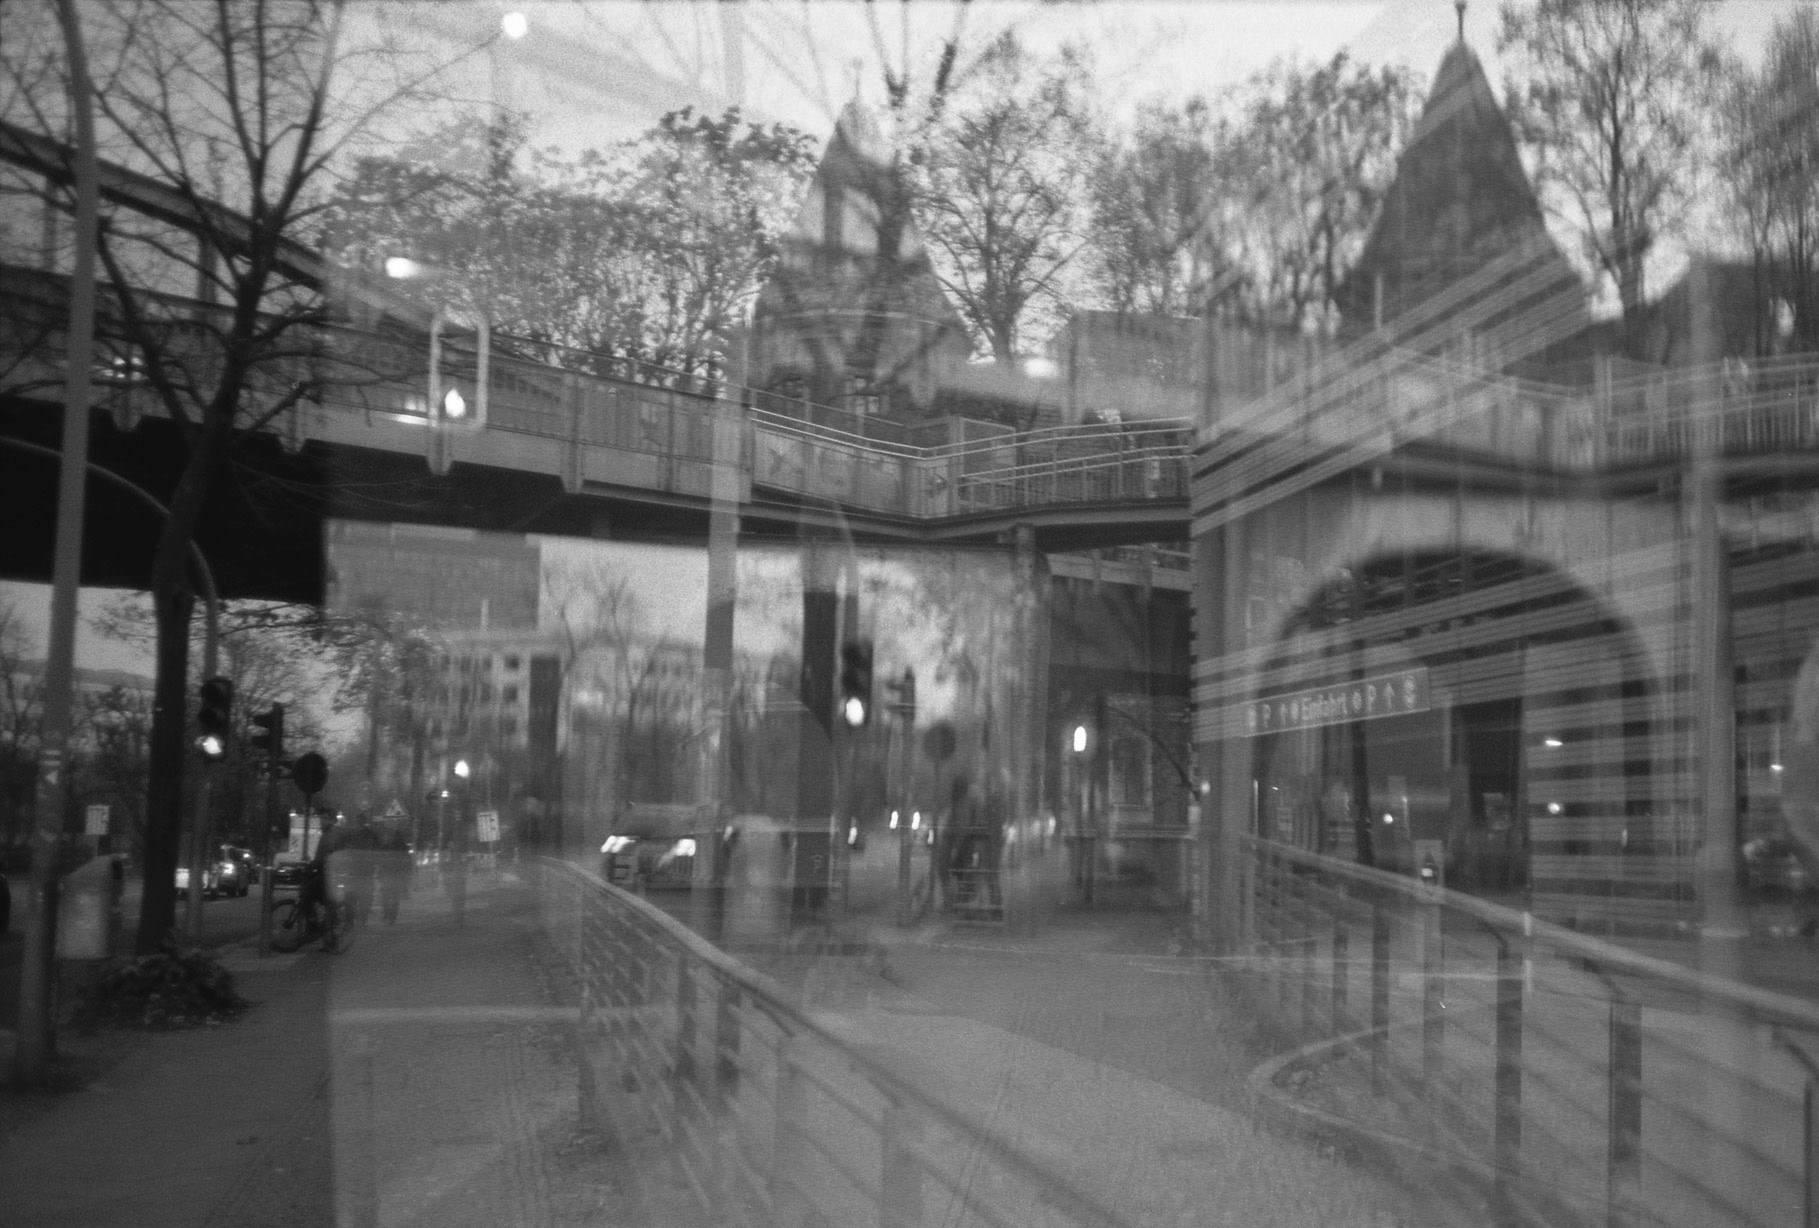 double exposure of the entrance of a subway train station and the bridge for the train tracks